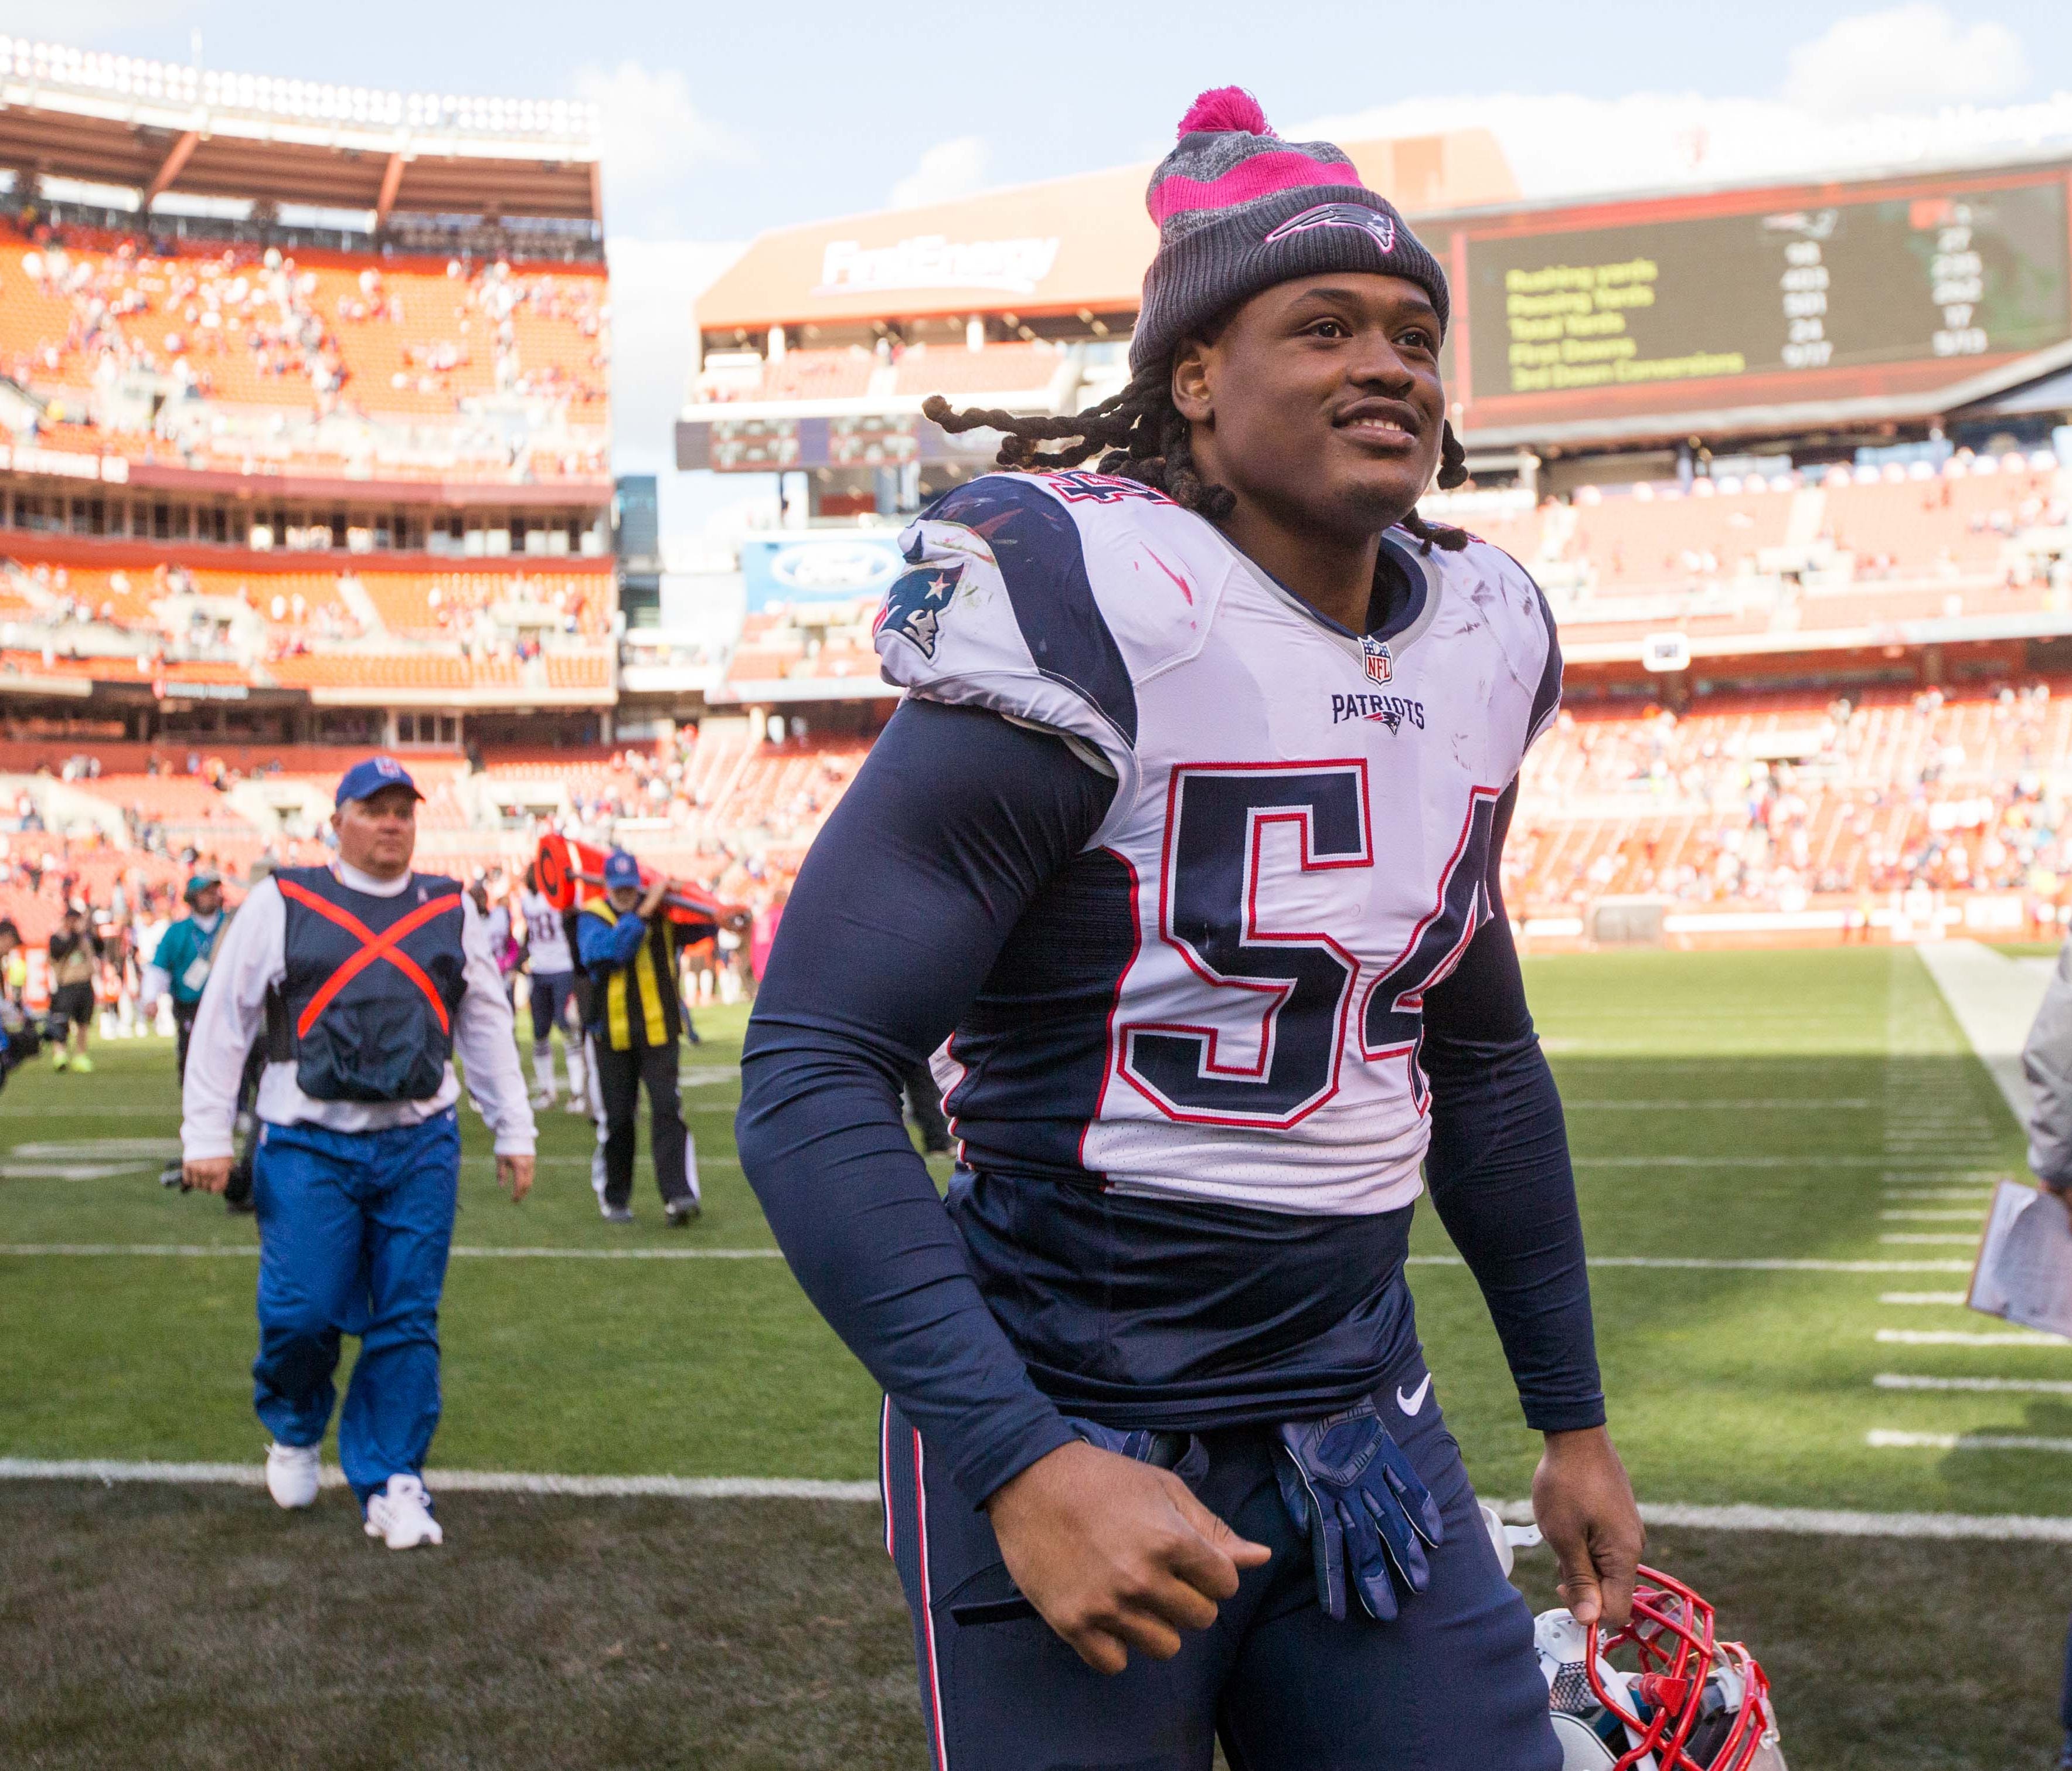 New England Patriots middle linebacker Dont'a Hightower (54) after the game against the Cleveland Browns at FirstEnergy Stadium.